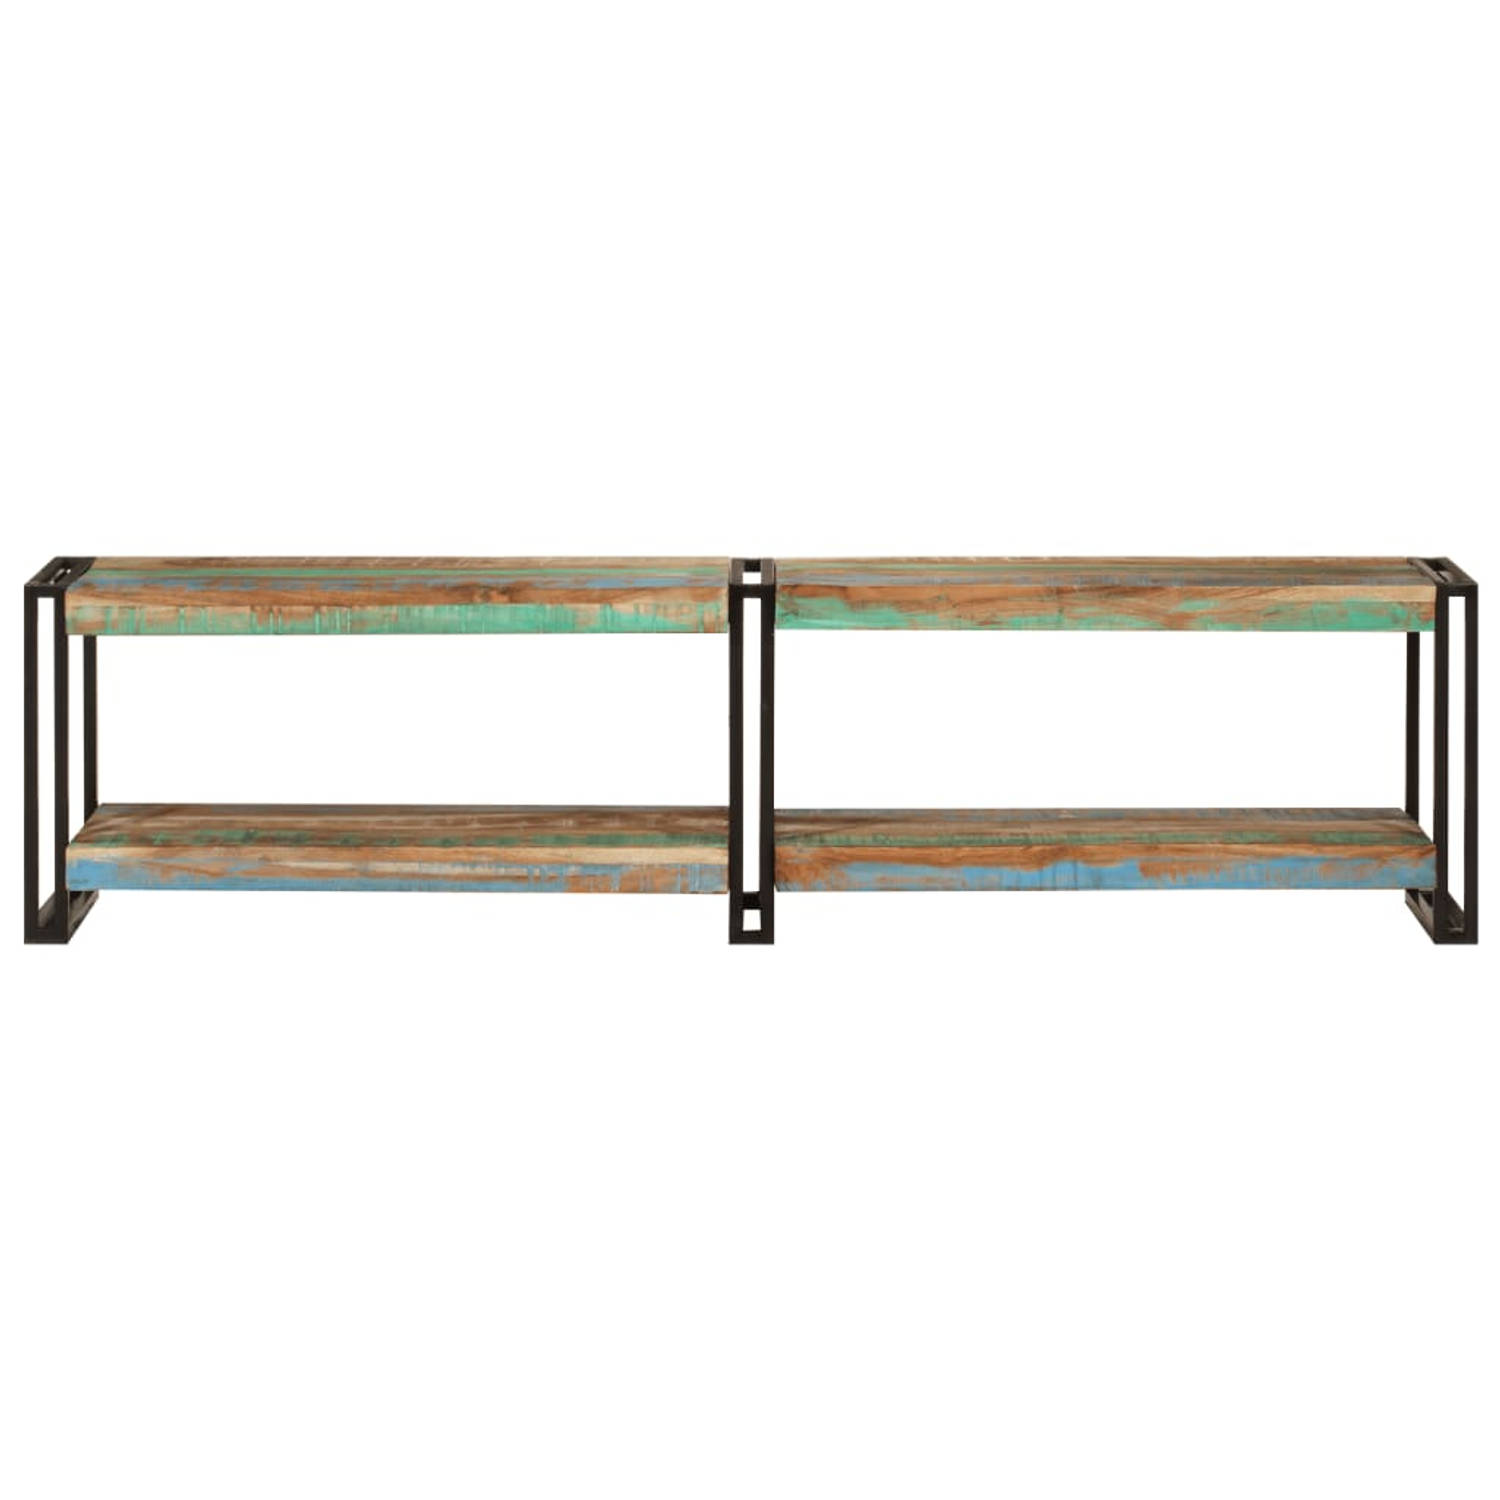 The Living Store Tv-kast Massief gerecycled hout Metalen frame 160 x 30 x 40 cm